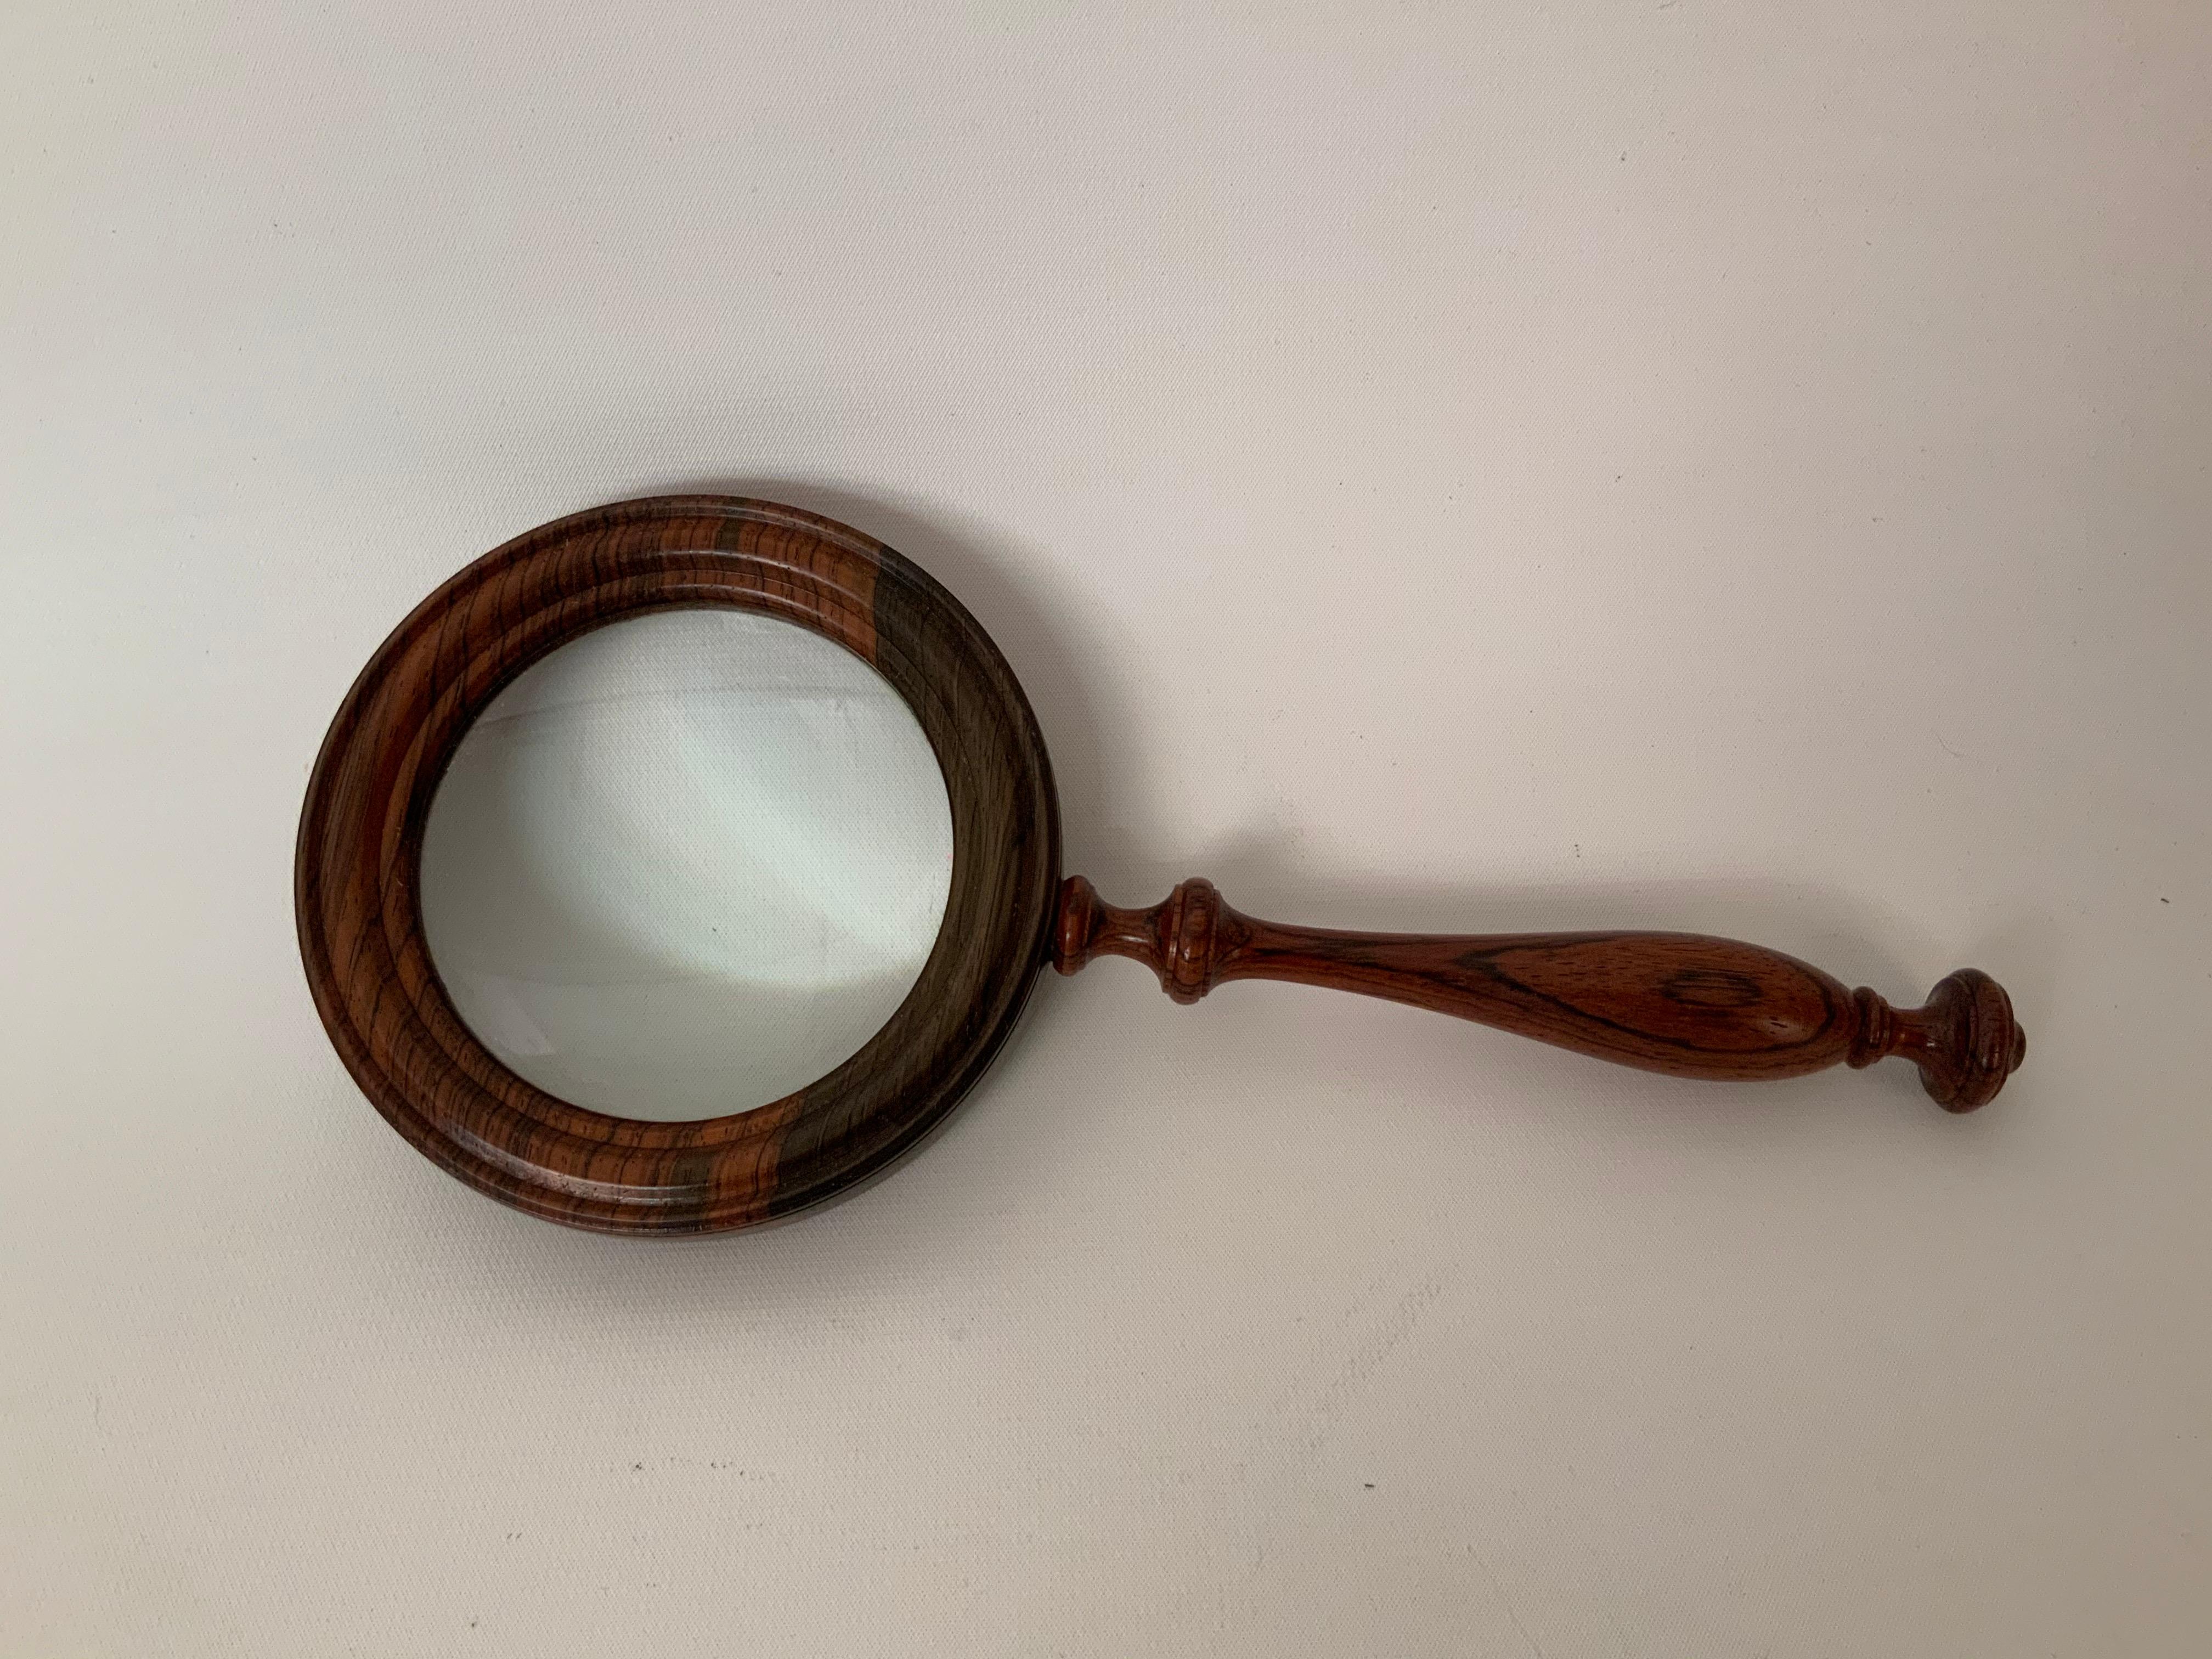 Edwardian 1960s Charles Deacon & Son Rosewood Handmade Magnifying Glass